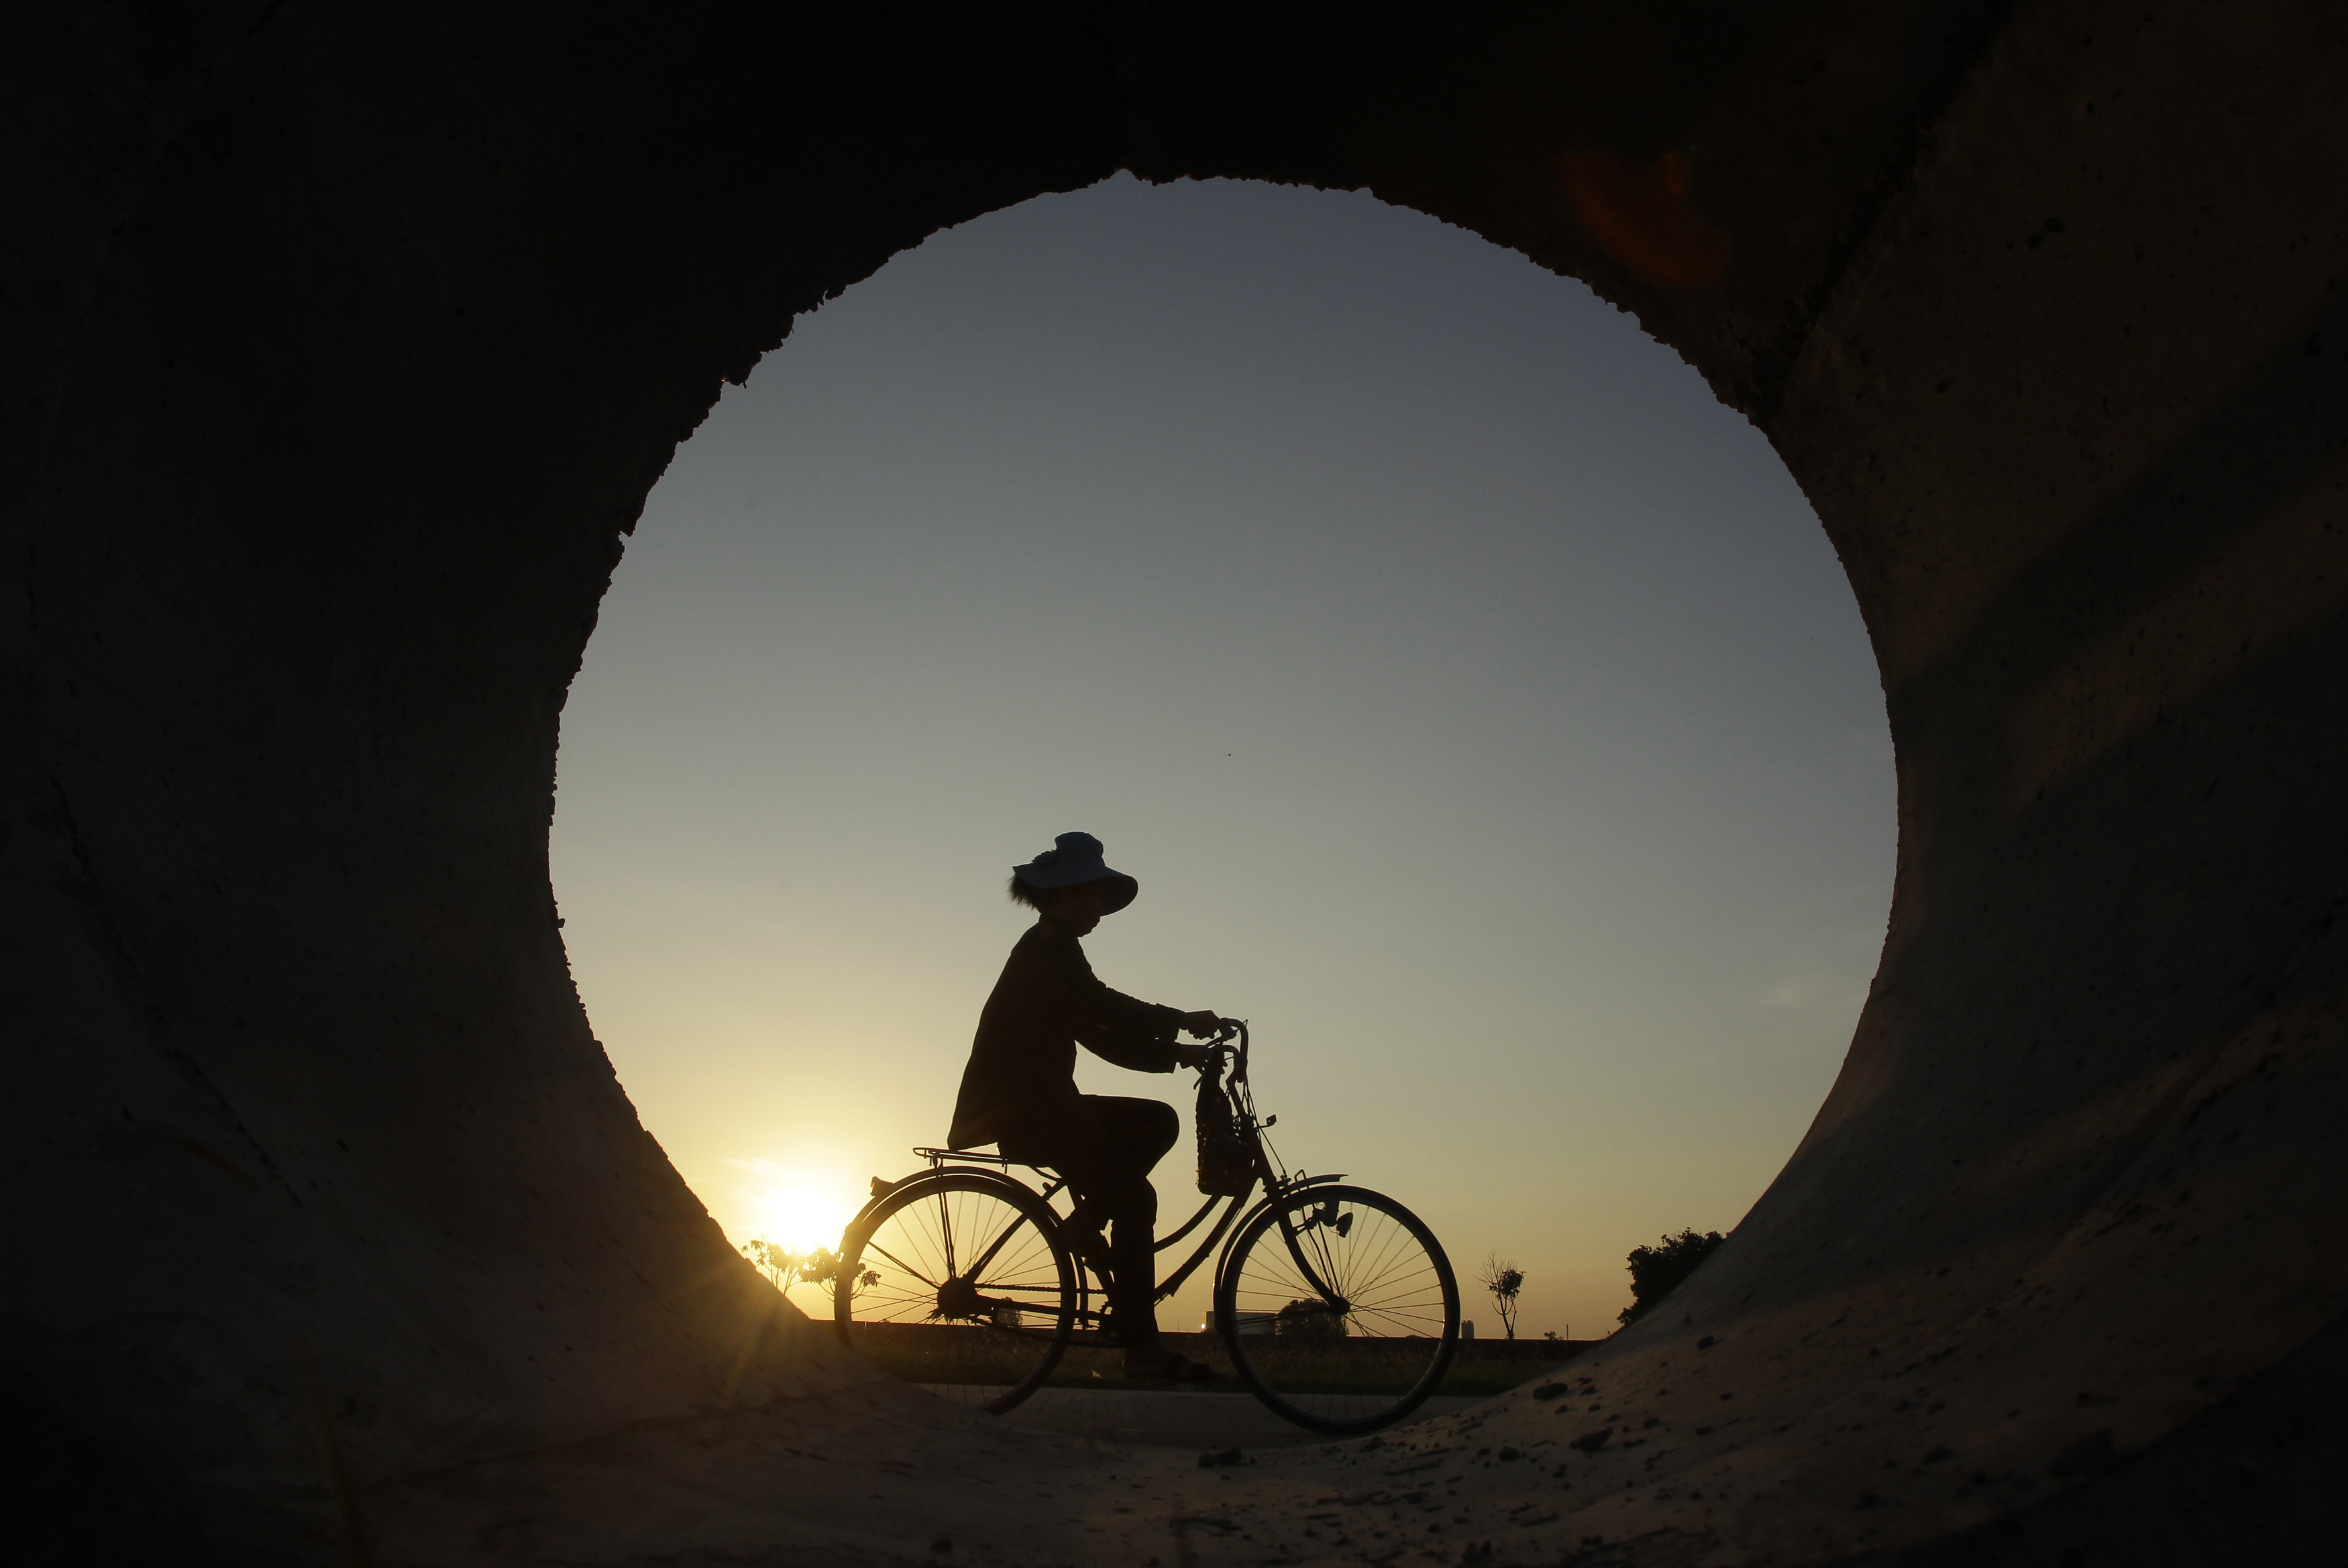 A construction worker cycles to head for working in Samroang village outside Phnom Penh, Cambodia, Tuesday, May 21, 2019. (AP Photo/Heng Sinith)